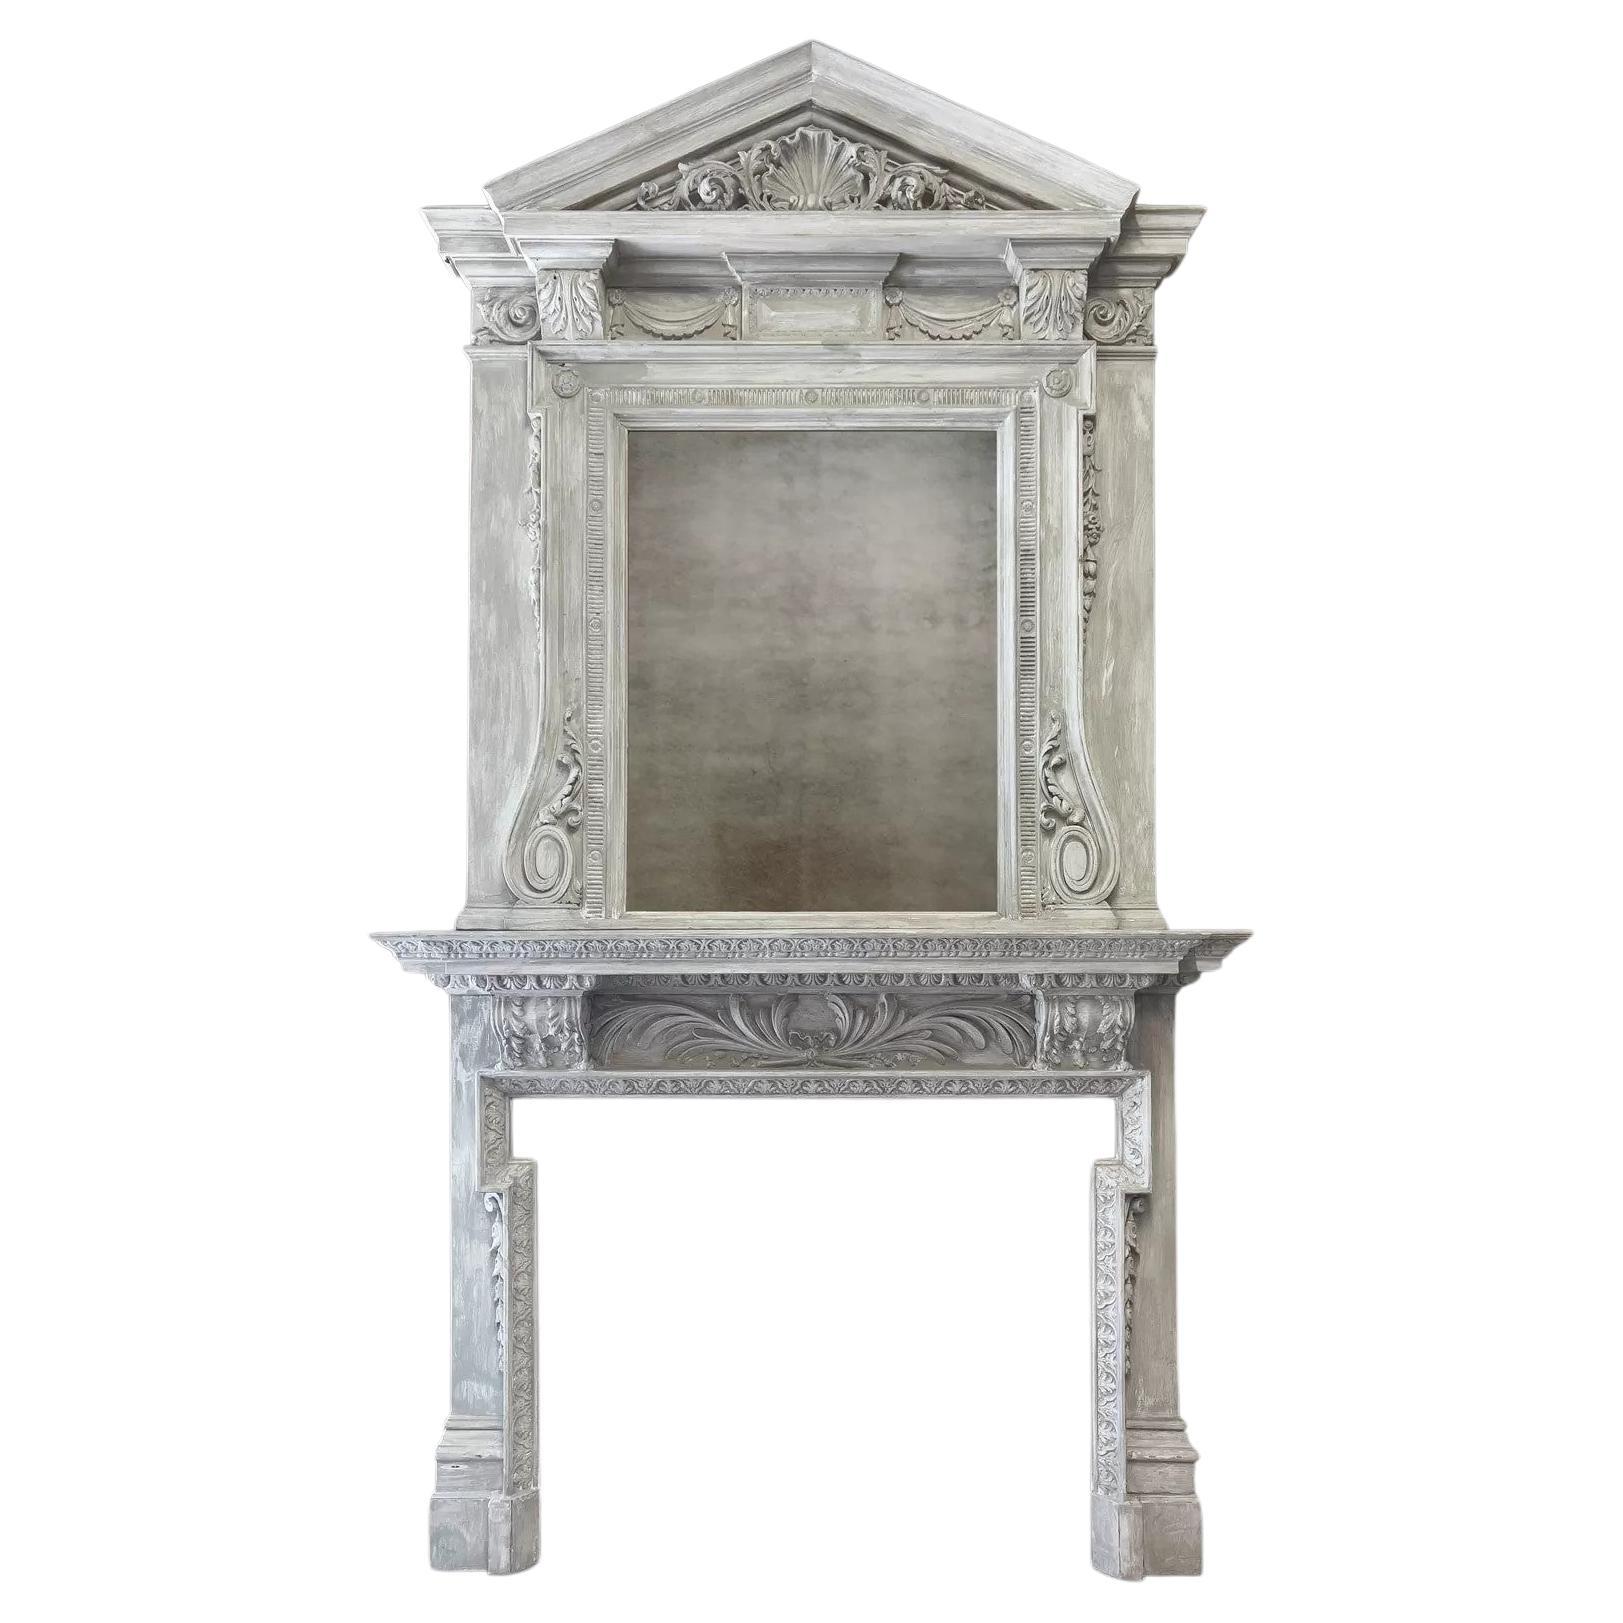 A large antique painted wooden fireplace with overmantel mirror For Sale